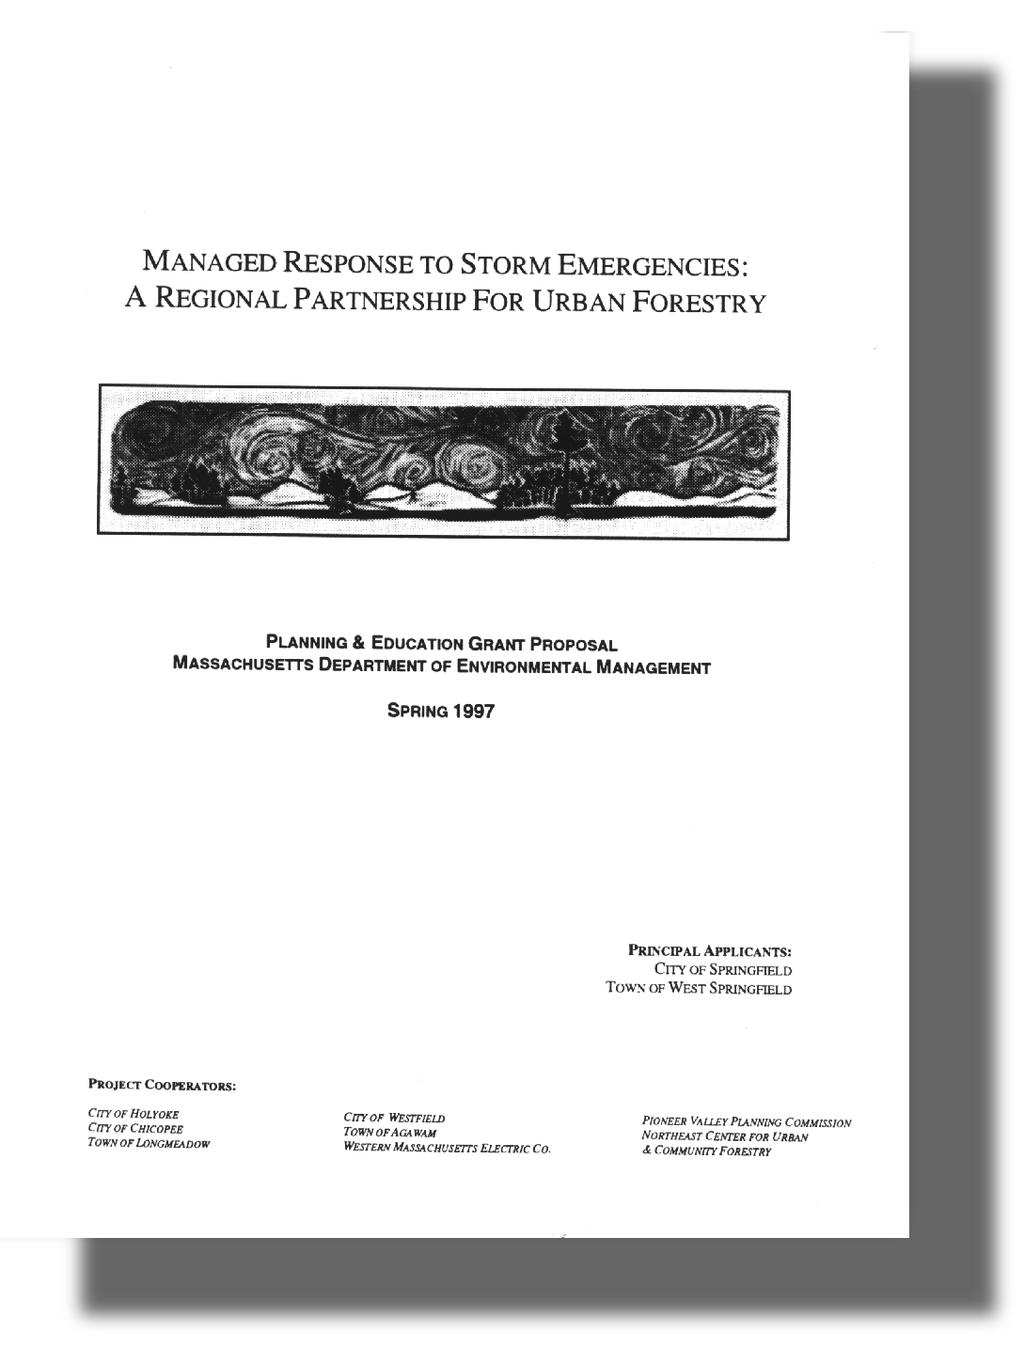 FY 1999 (Cont'd) Volunteer inventory training Management Planning and Policy Manual Provide technical assistance and technology transfer for storm recovery and reforestation initiatives.